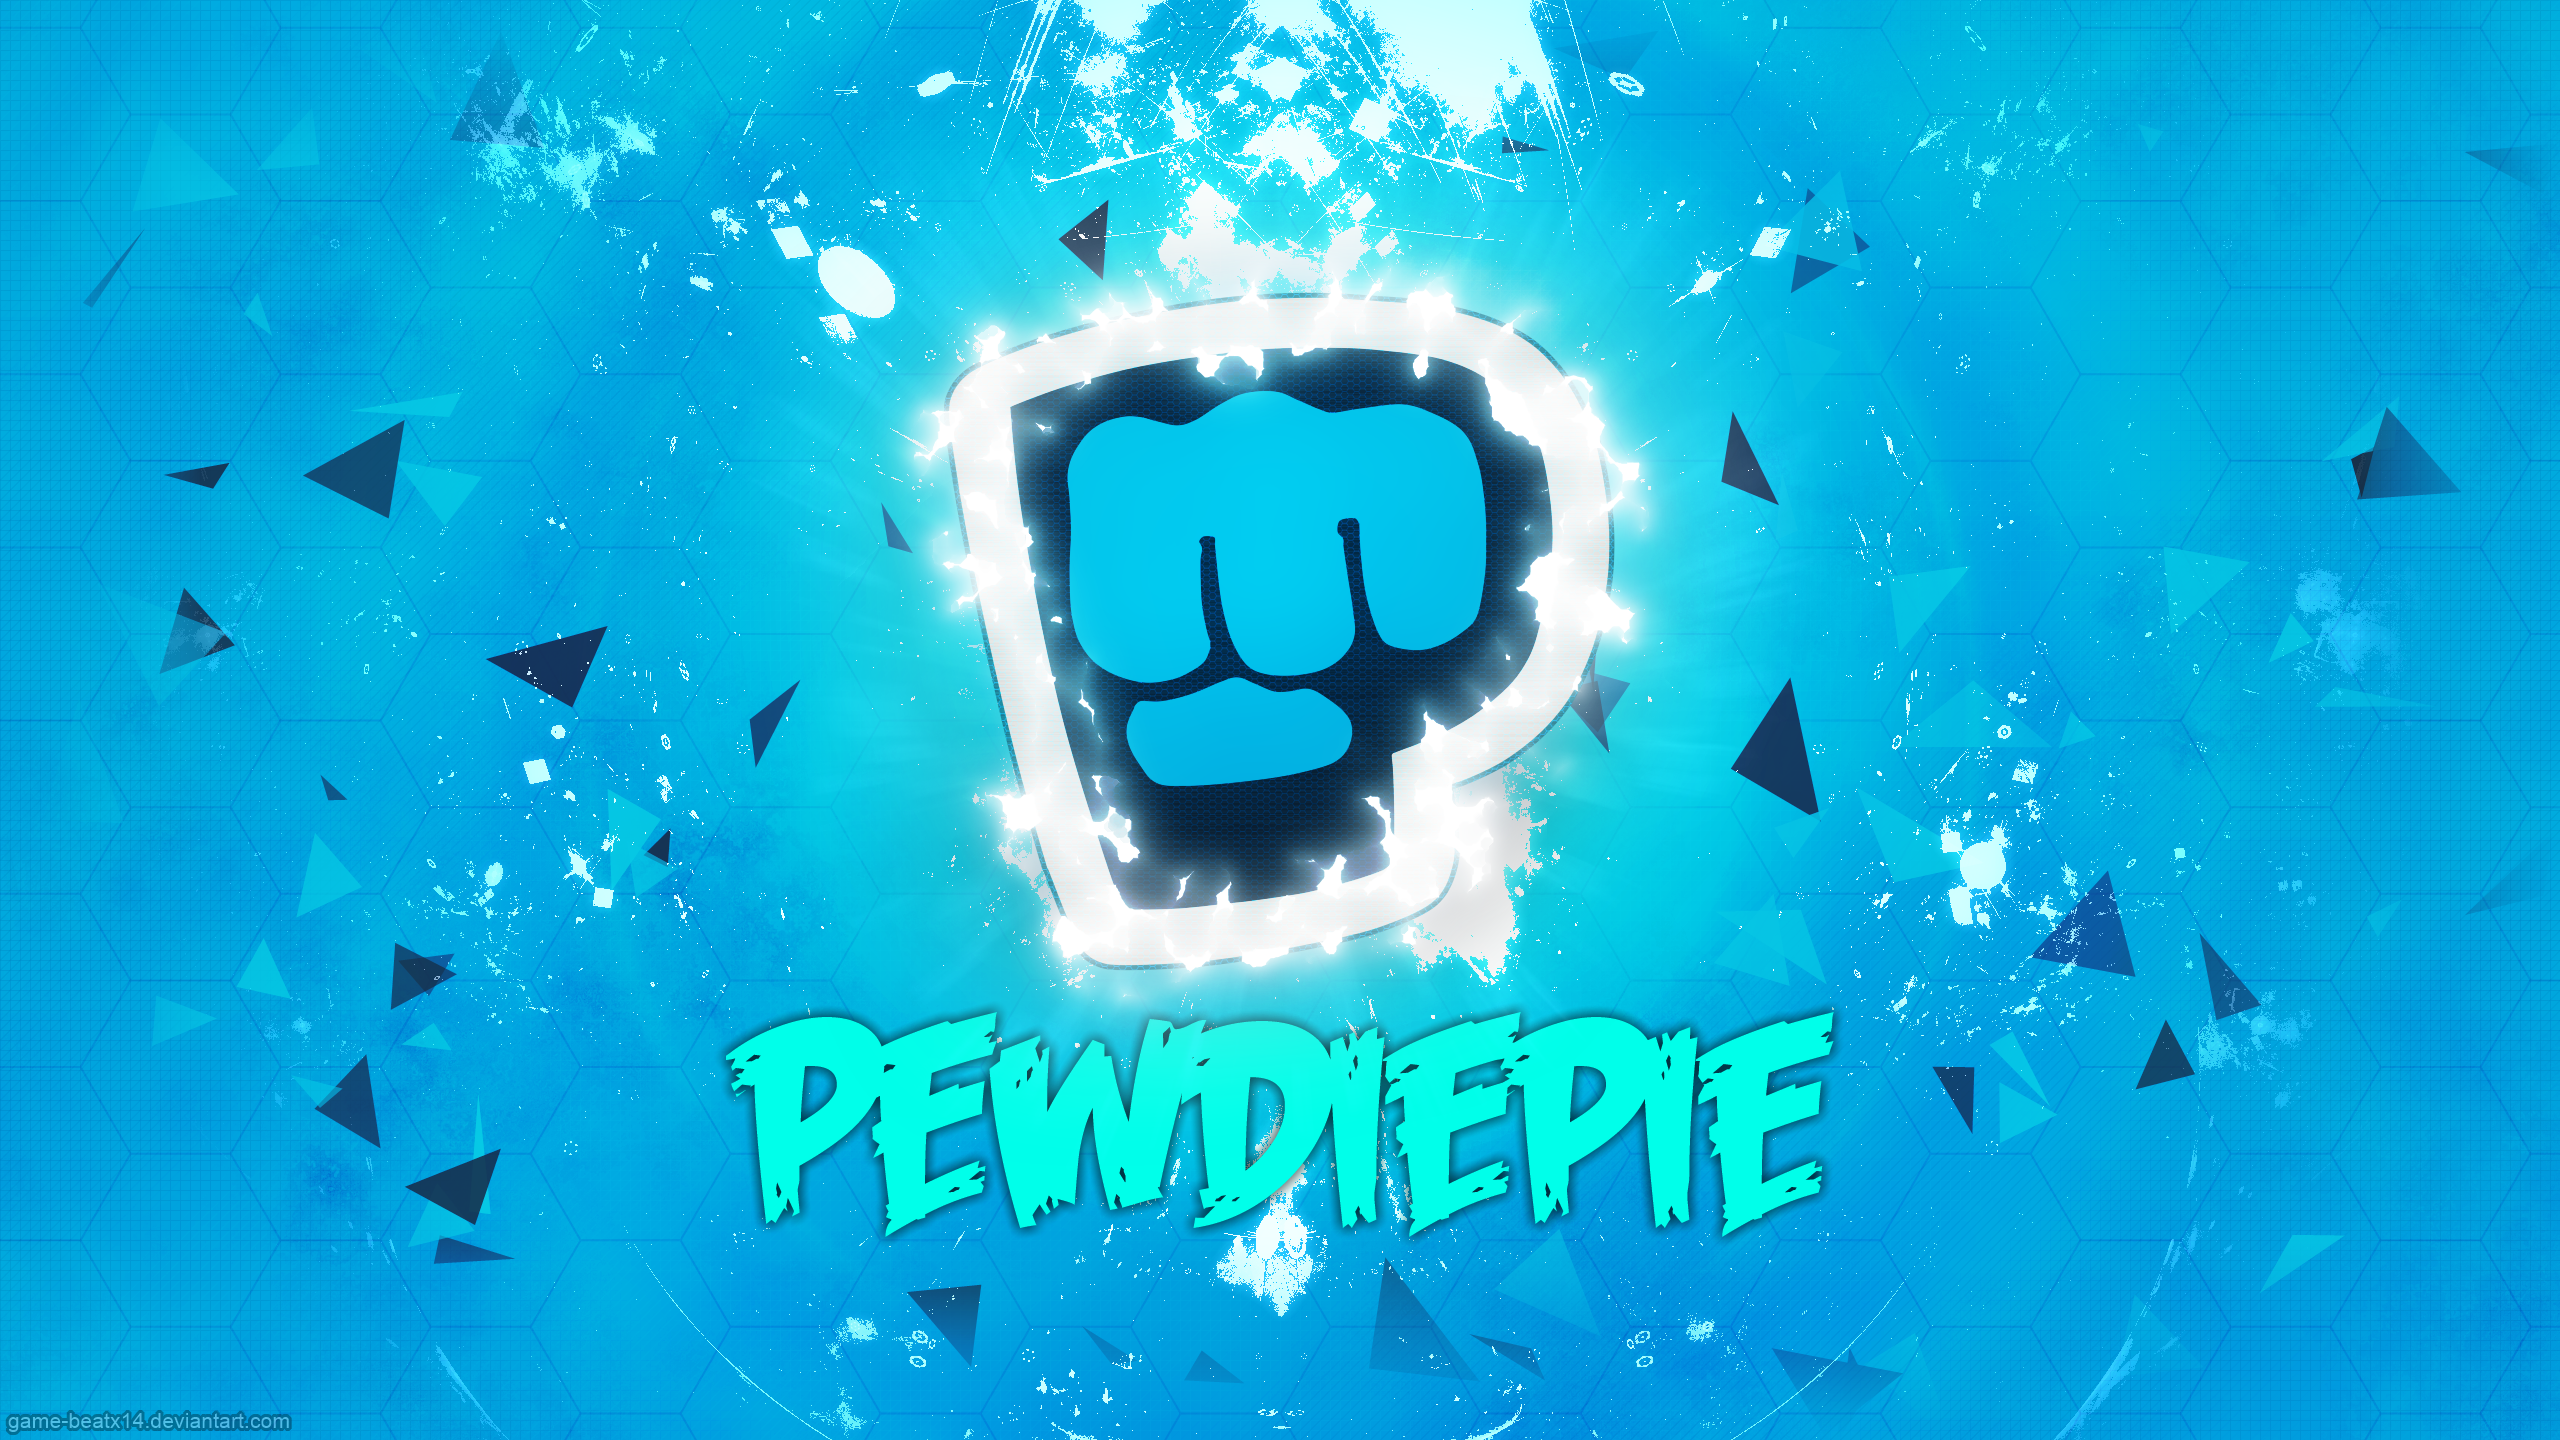 pewdiepie wallpaper by game beatx14 fan art wallpaper other recently